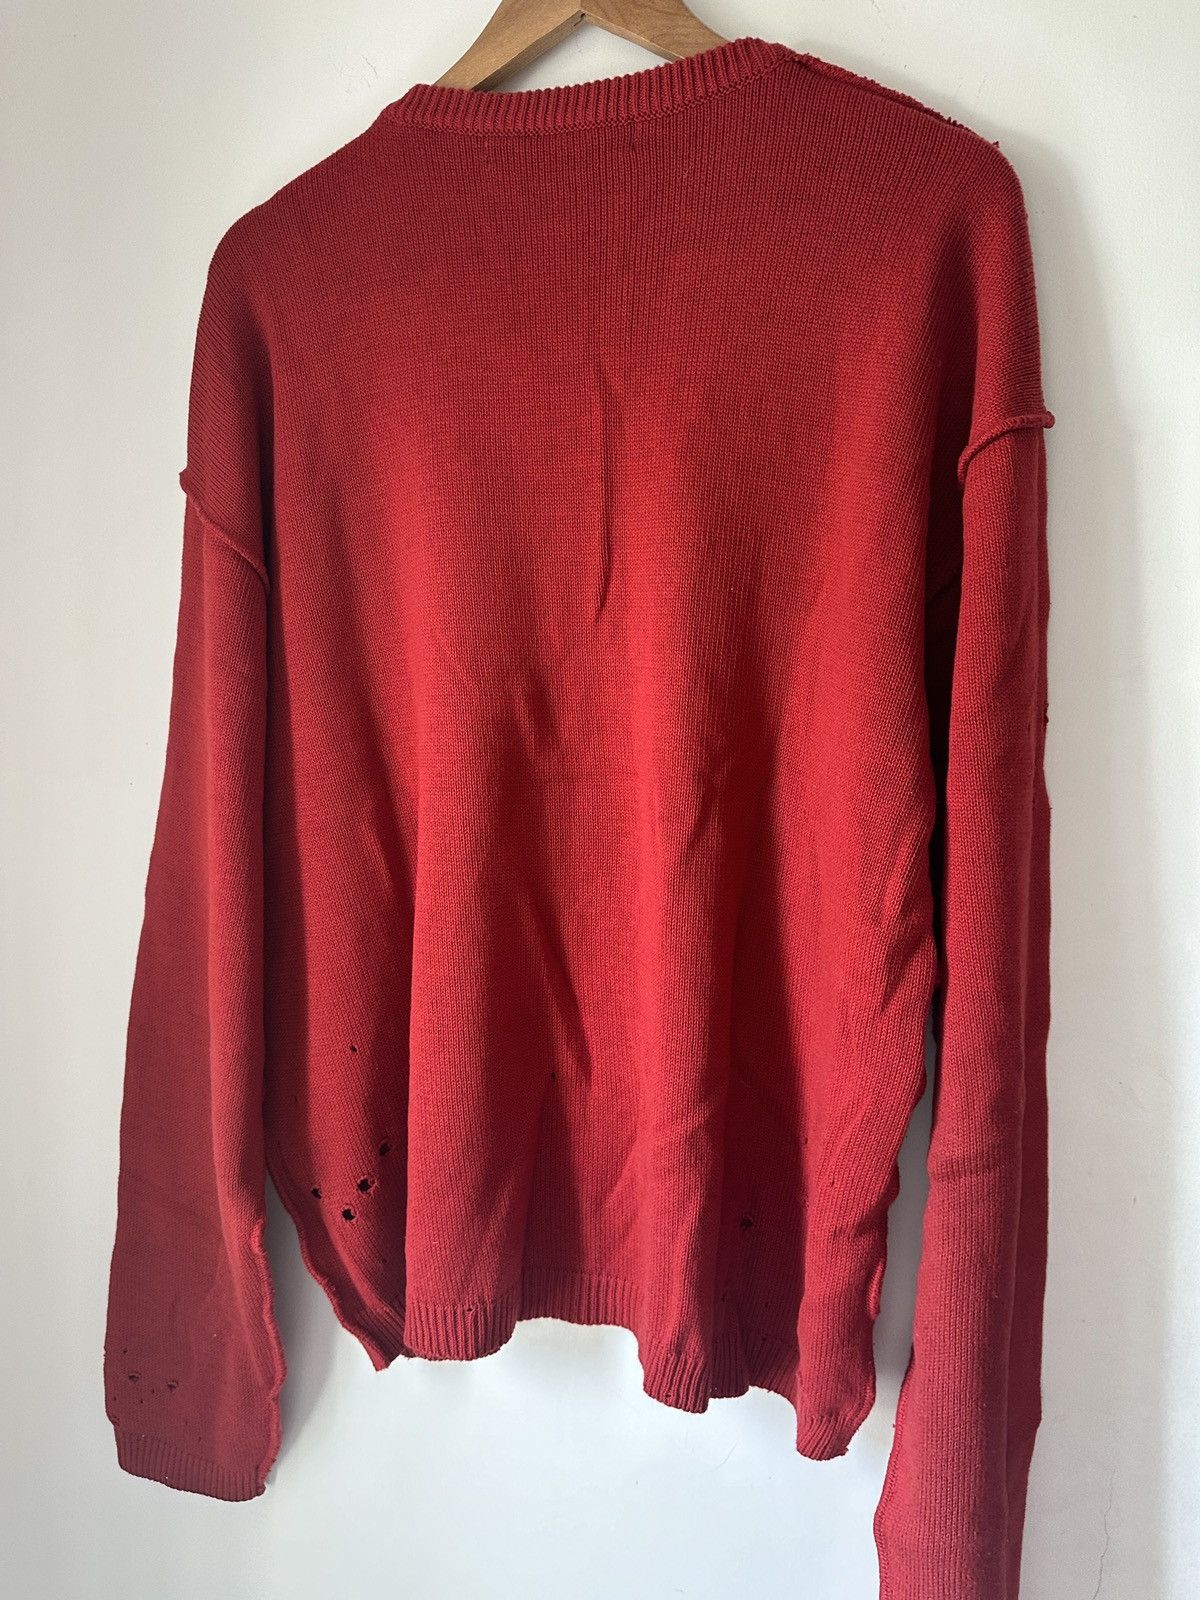 MISBHV Distressed Knitted Red Sweater - 4